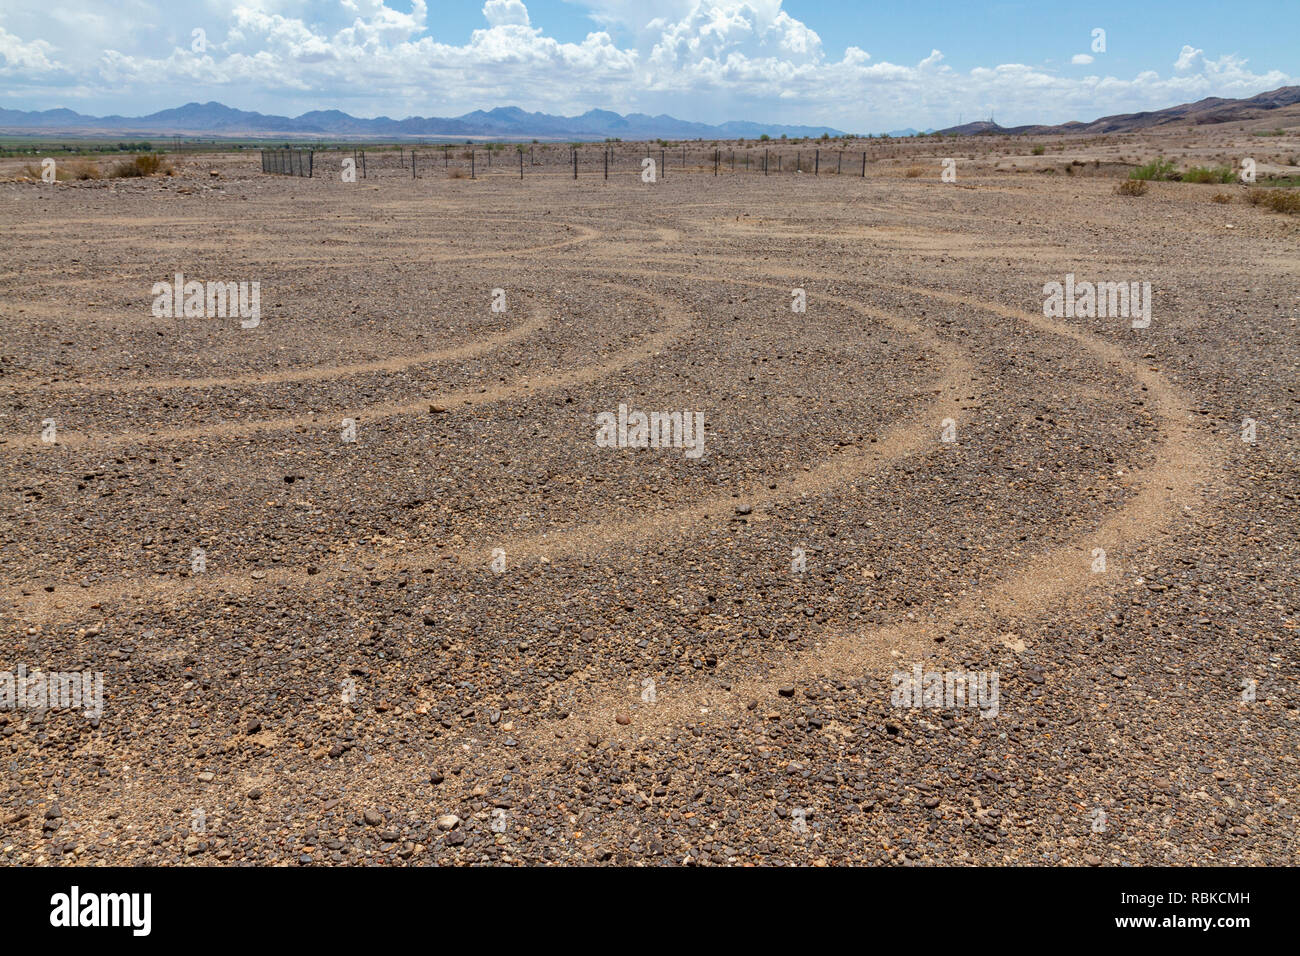 The 'crown' of a human figure (? see add. info), part of the Blythe Intaglios, near Blythe, CA, USA. Stock Photo